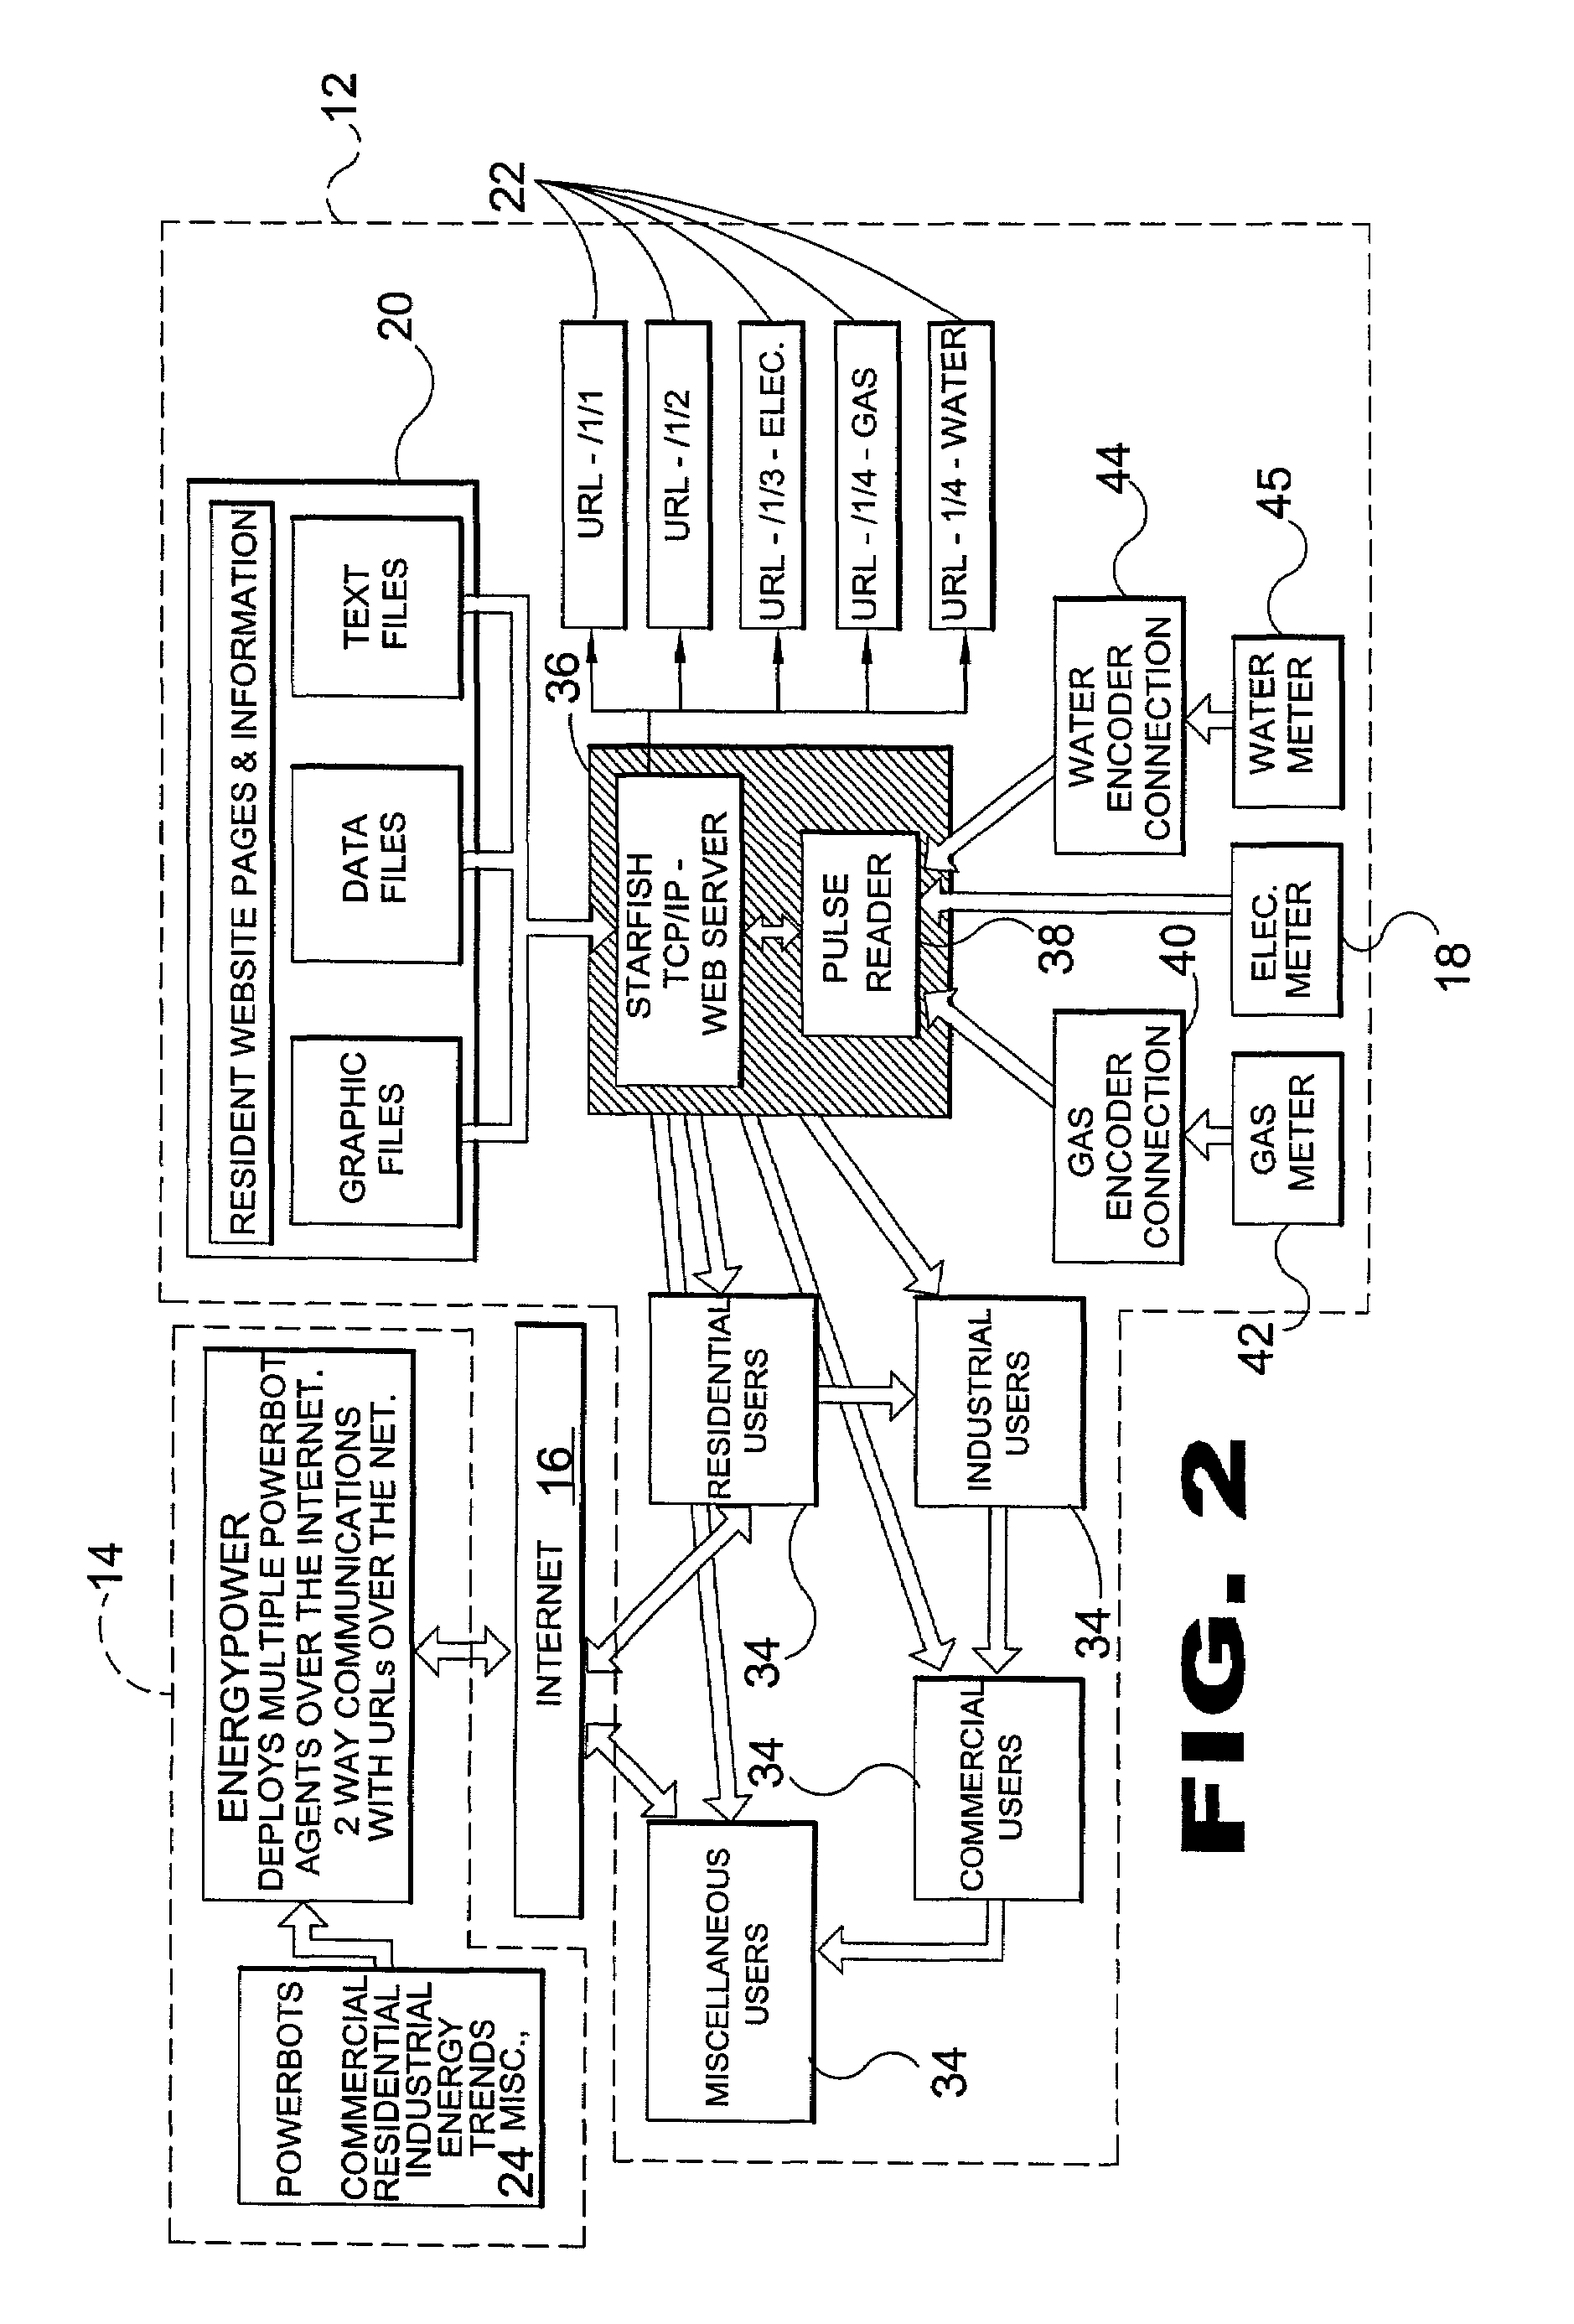 Method and system for energy management using intelligent agents over the internet